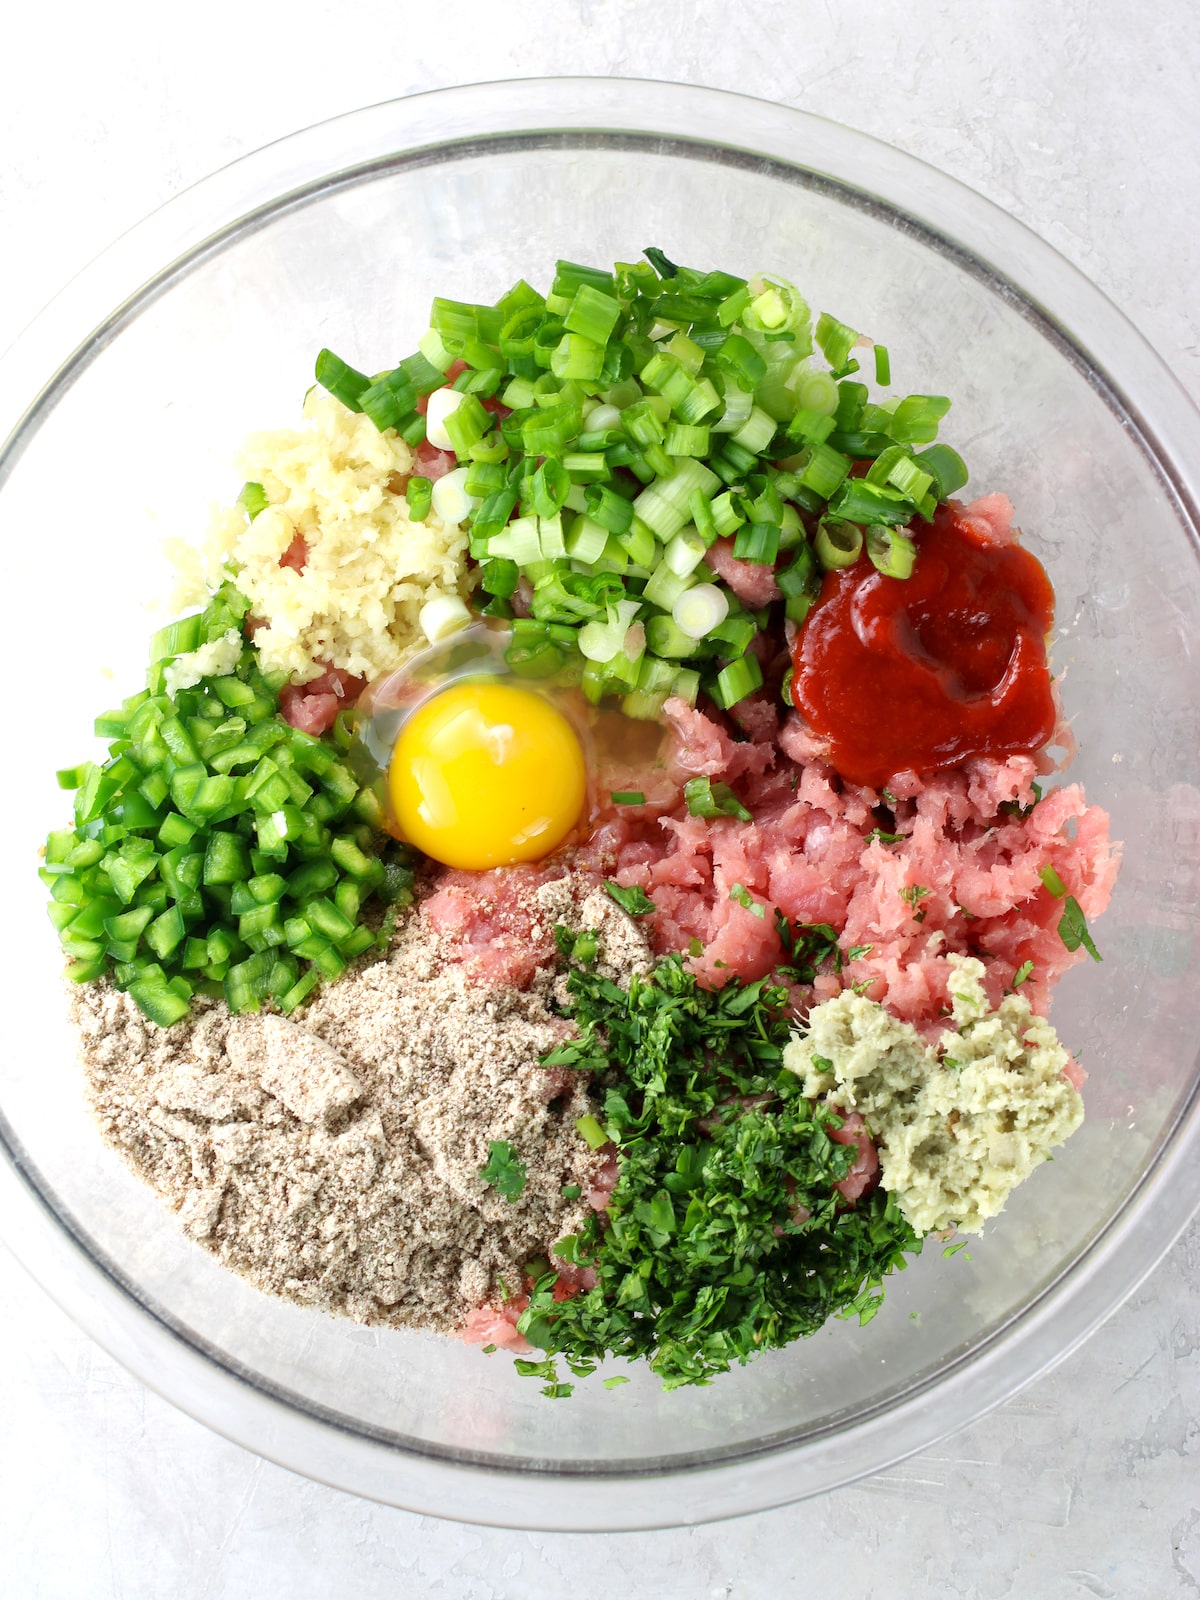 A large glass bowl with the burger ingredients before mixing them together.